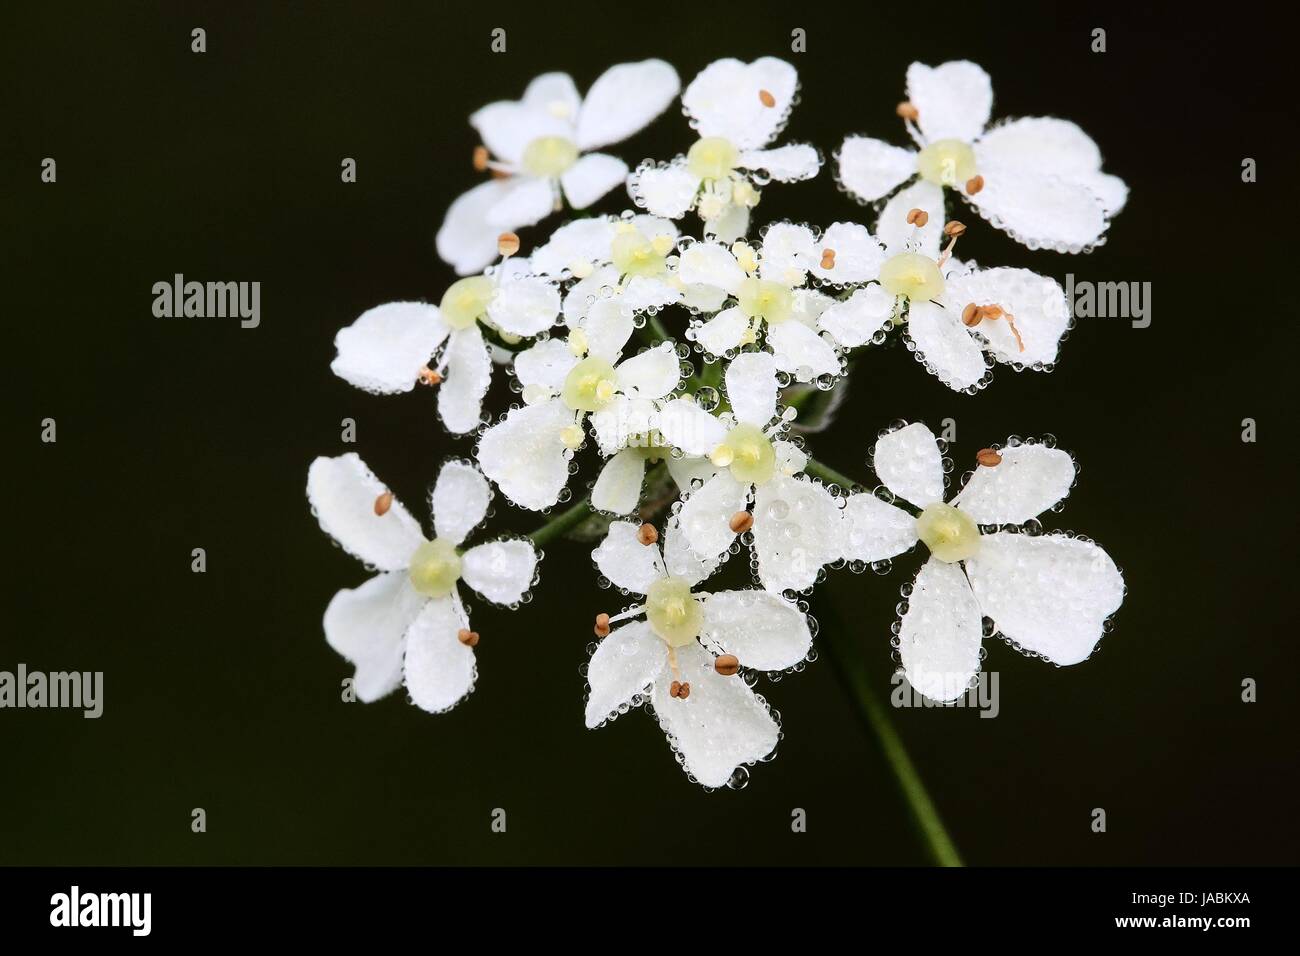 Flowers of Cow Parsley (Anthriscus sylvestris) Stock Photo